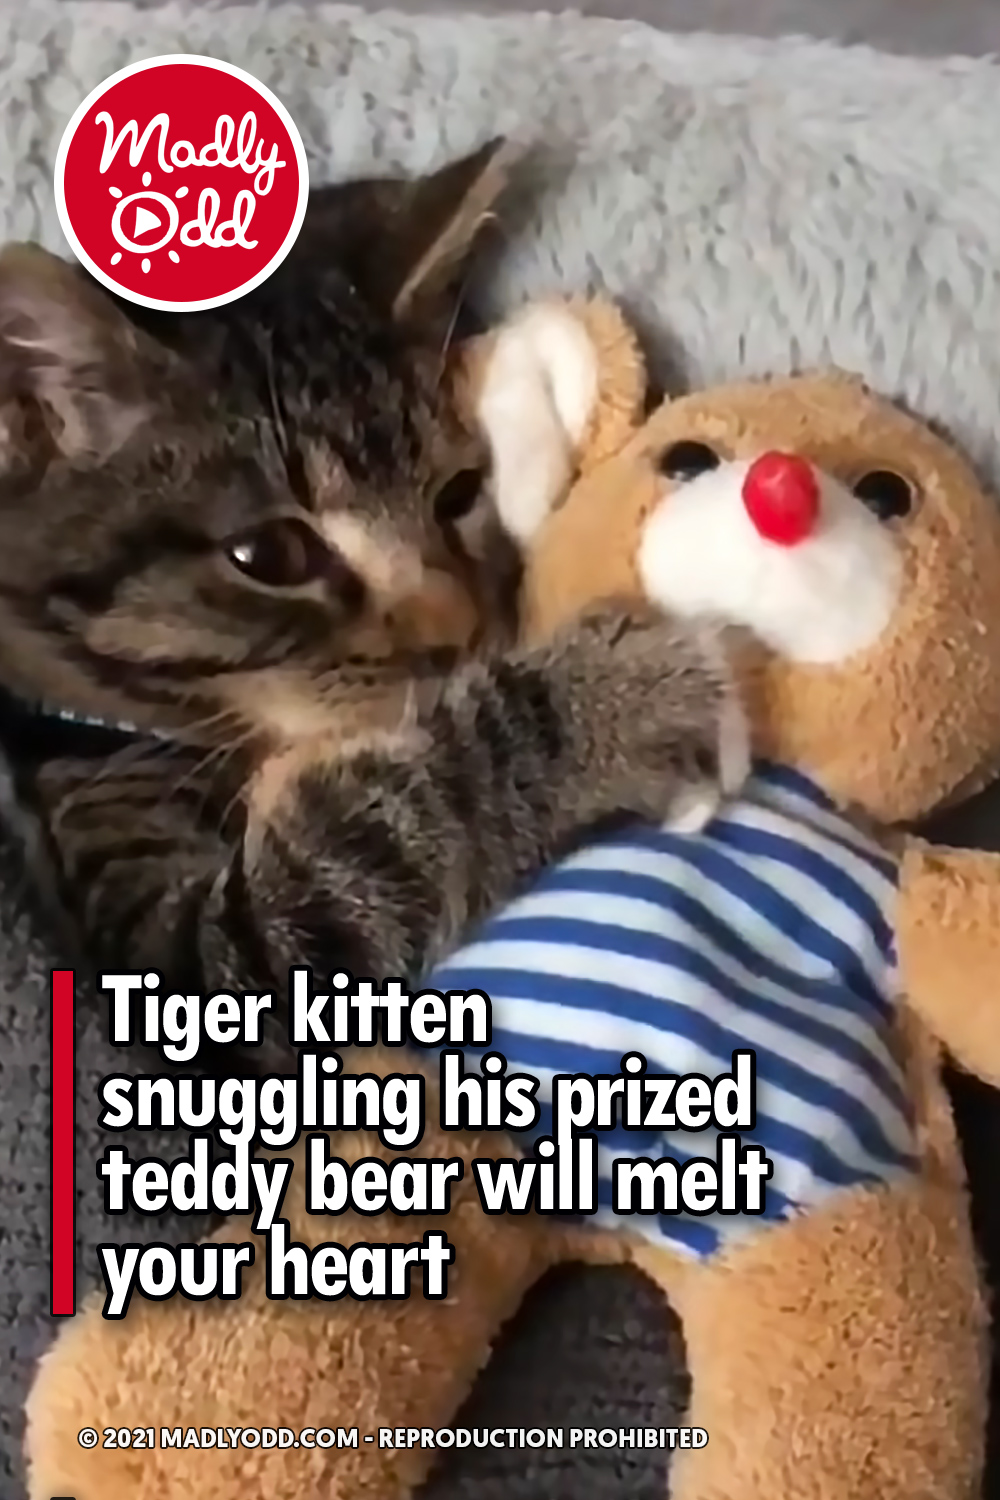 Tiger kitten snuggling his prized teddy bear will melt your heart